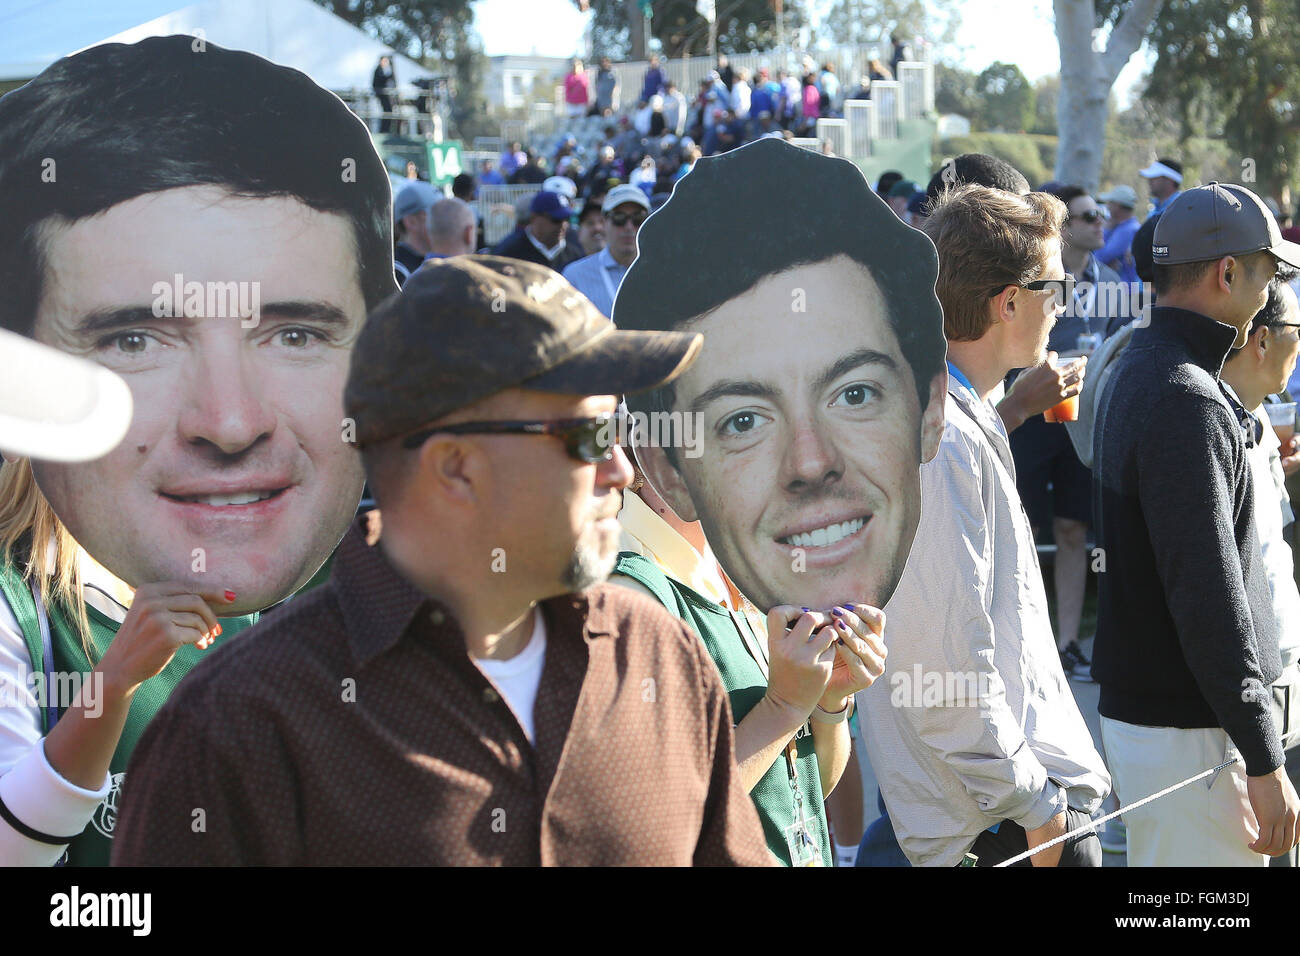 Pacific Palisades, CA, USA. 19th Feb, 2016. February 19, 2016: Bubba Watson and Rory McIlroy FatHead during the second round of the Northern Trust Open, Pacific Palisades, CA. Michael Zito/ESW/CSM/Alamy Live News Stock Photo